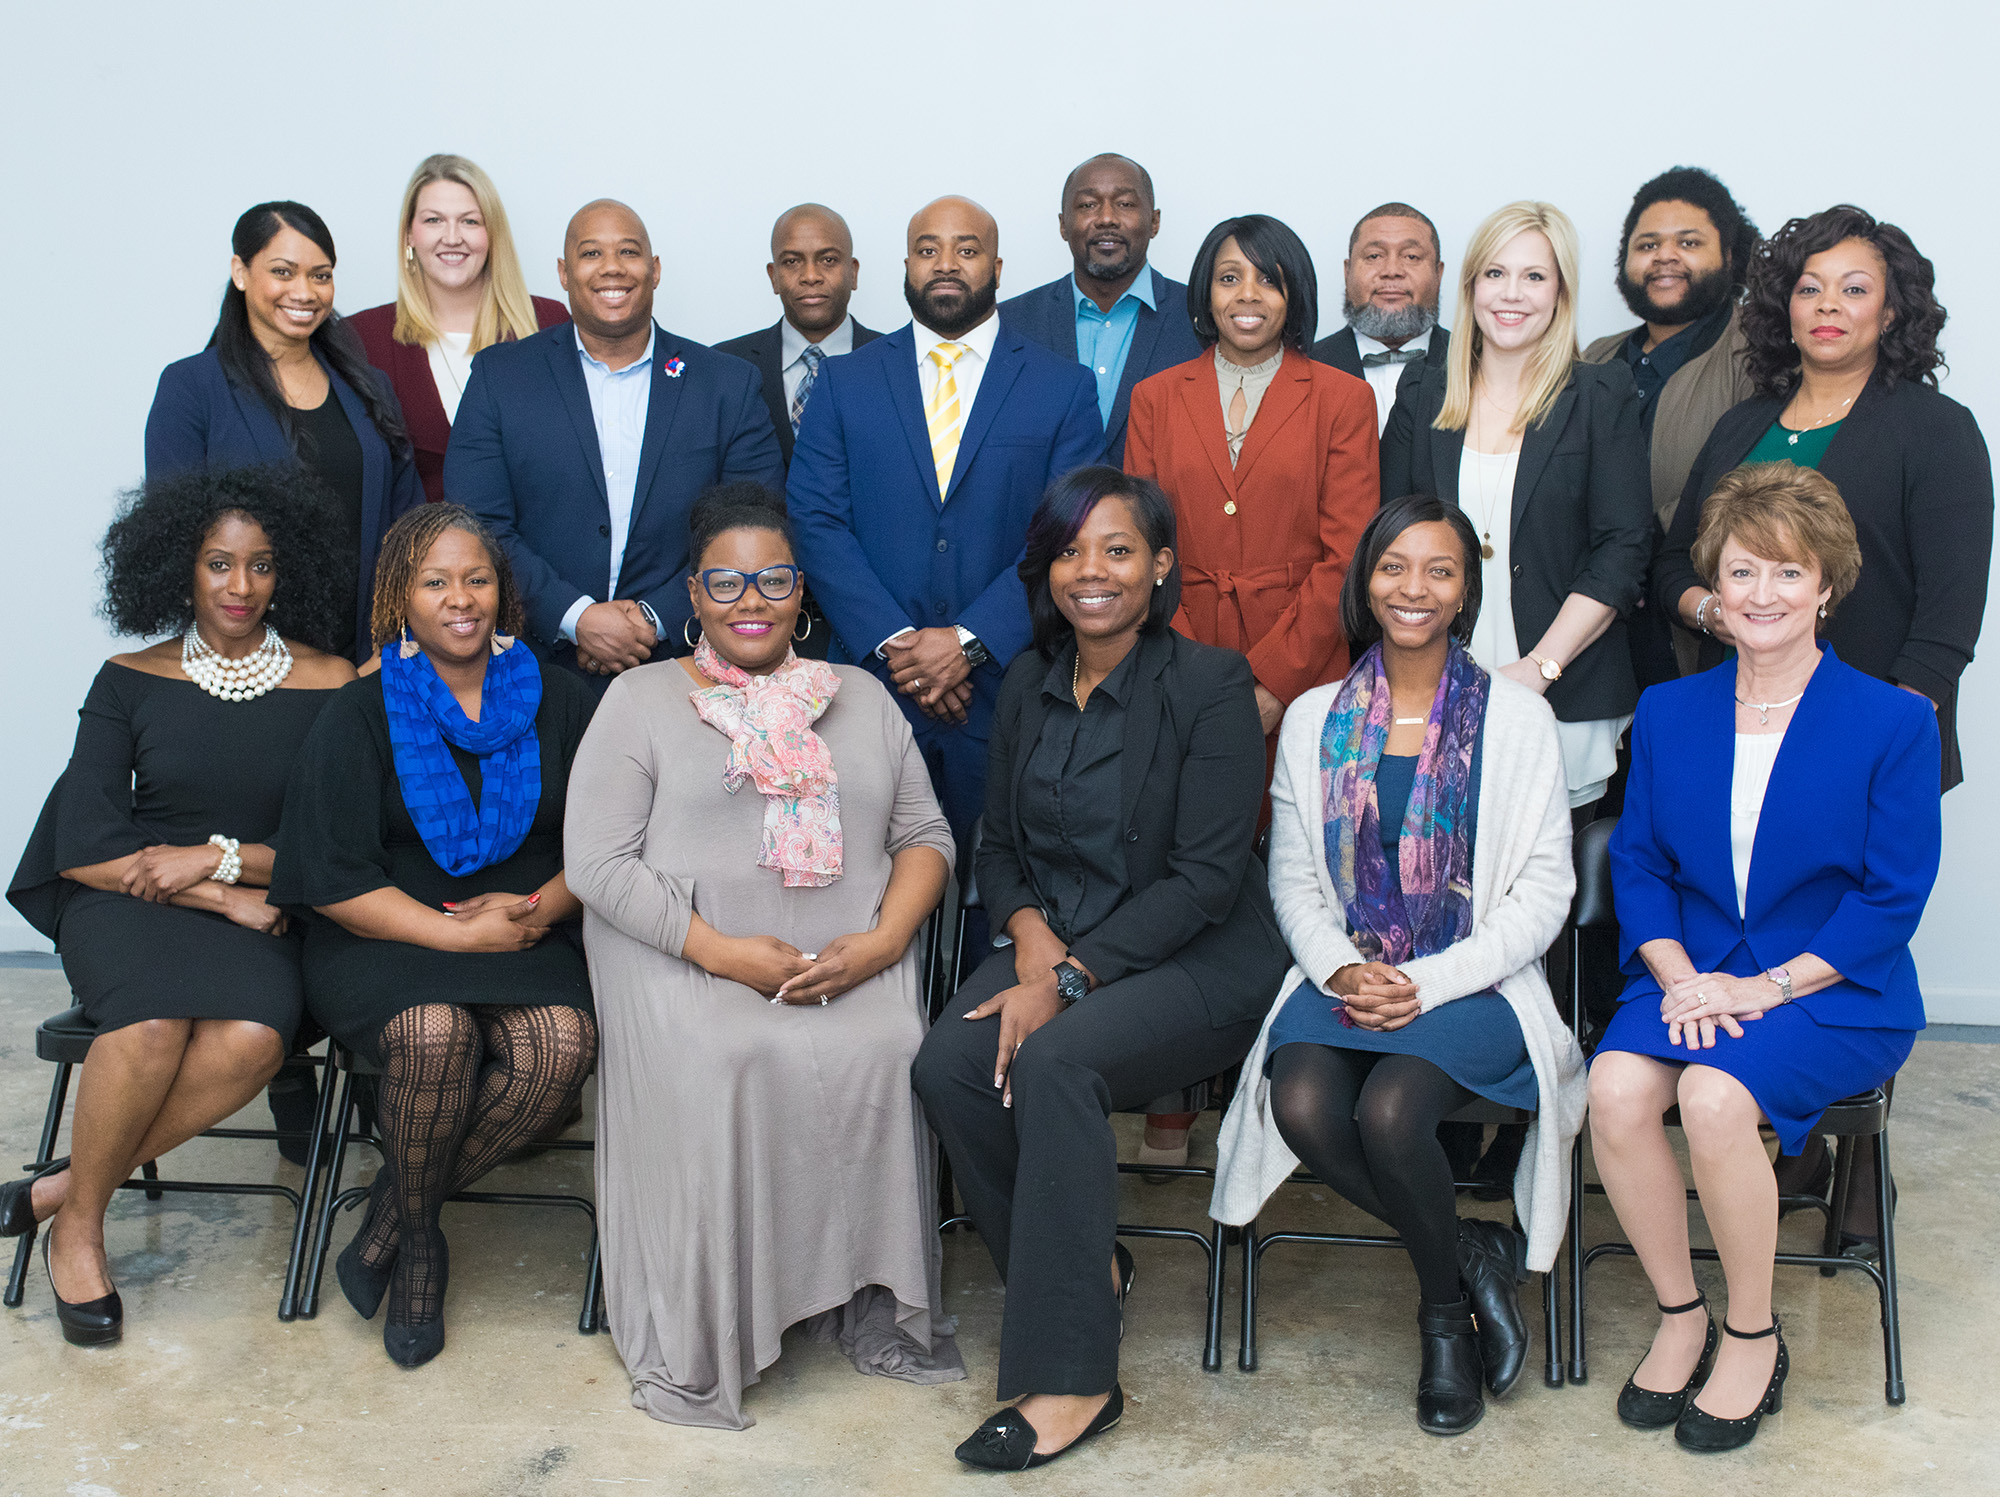 RELEASE – Greenville Chamber Announces 17 Participants In Its 2019 Minority Business Accelerator